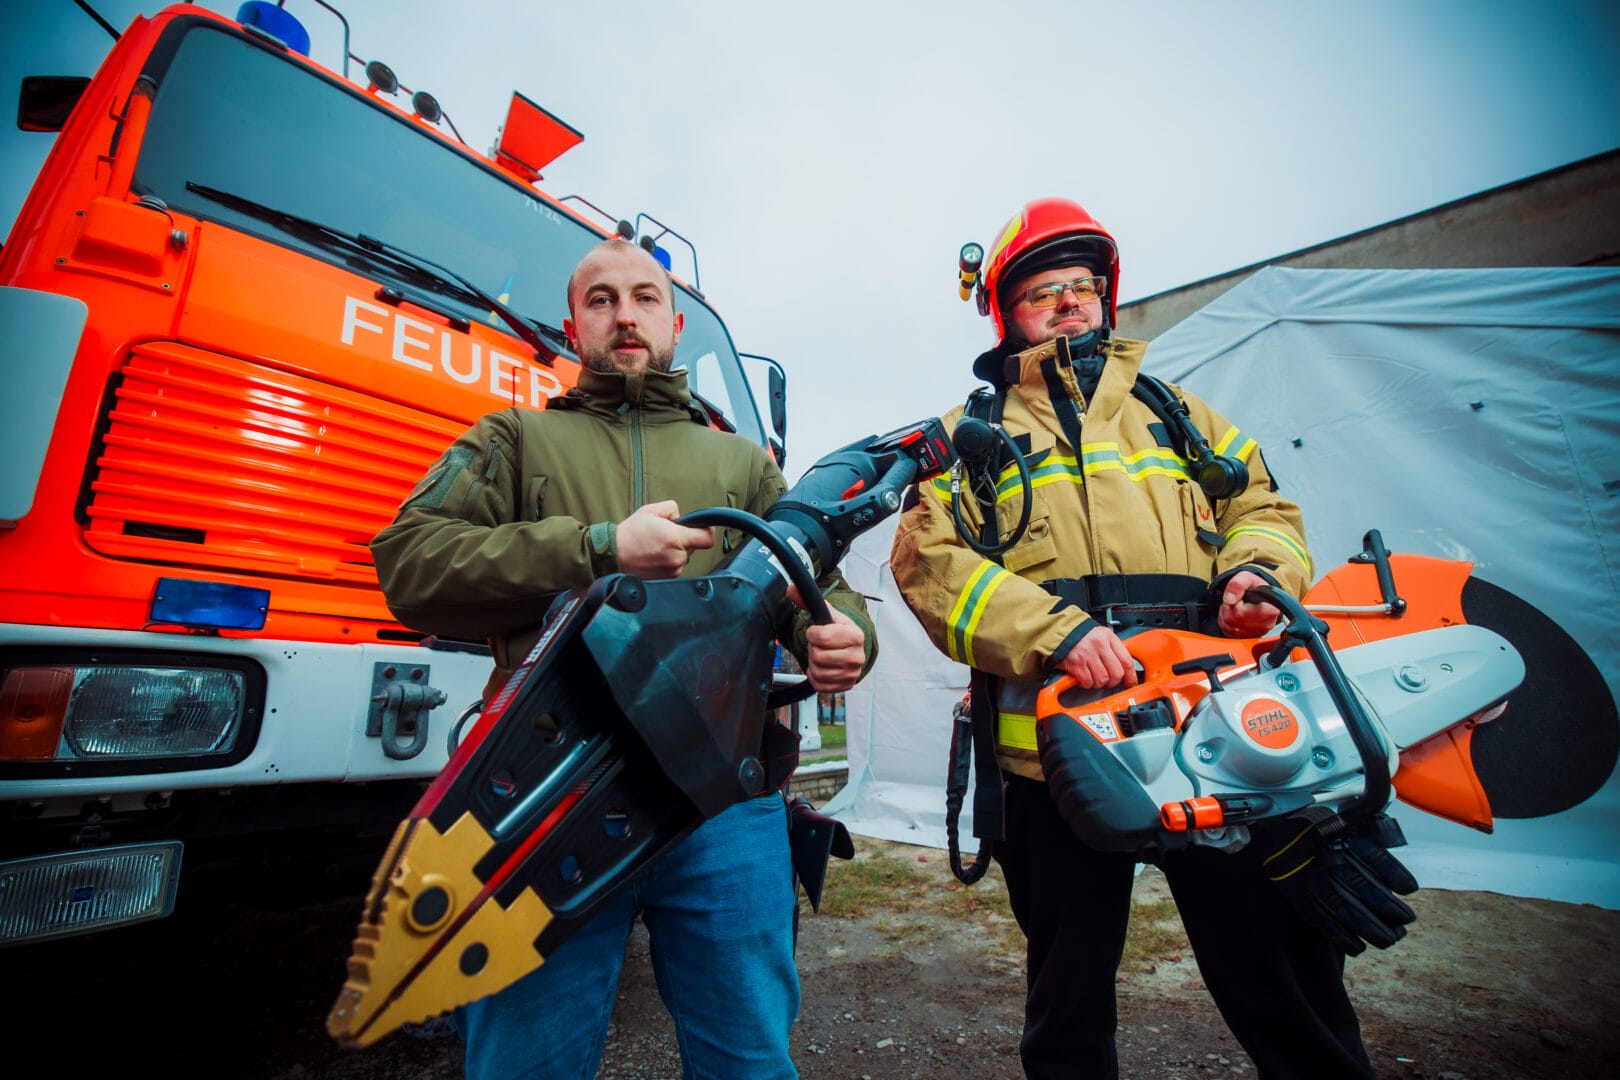 Members of the Volunteer Fire Brigade with equipment on the background of an insulated tent 